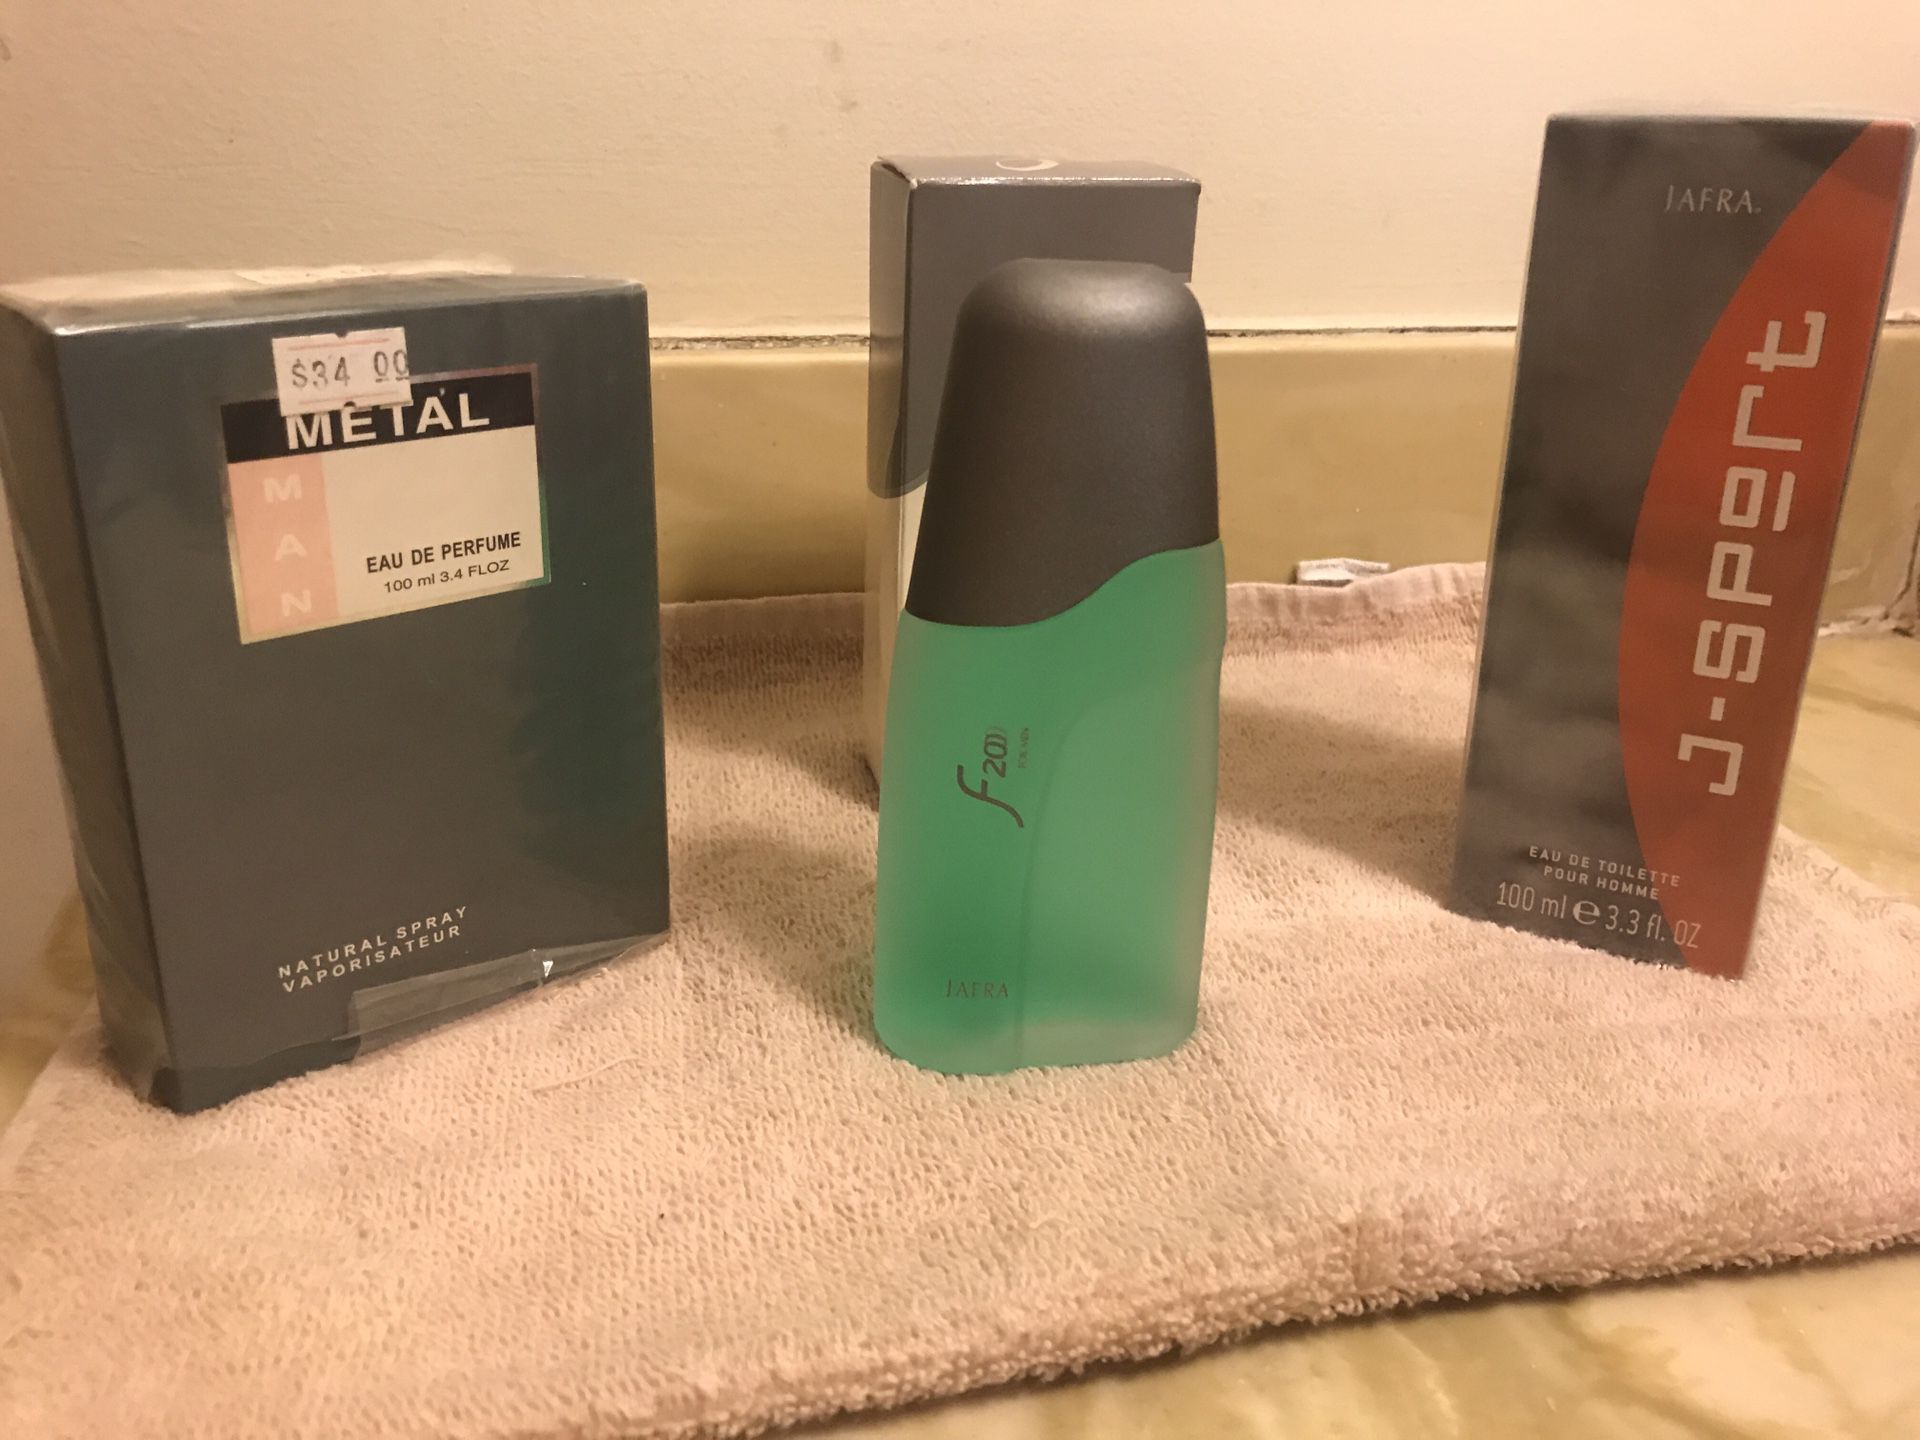 Chanel N 5 Perfume And Hair Mist Original for Sale in Whittier, CA - OfferUp